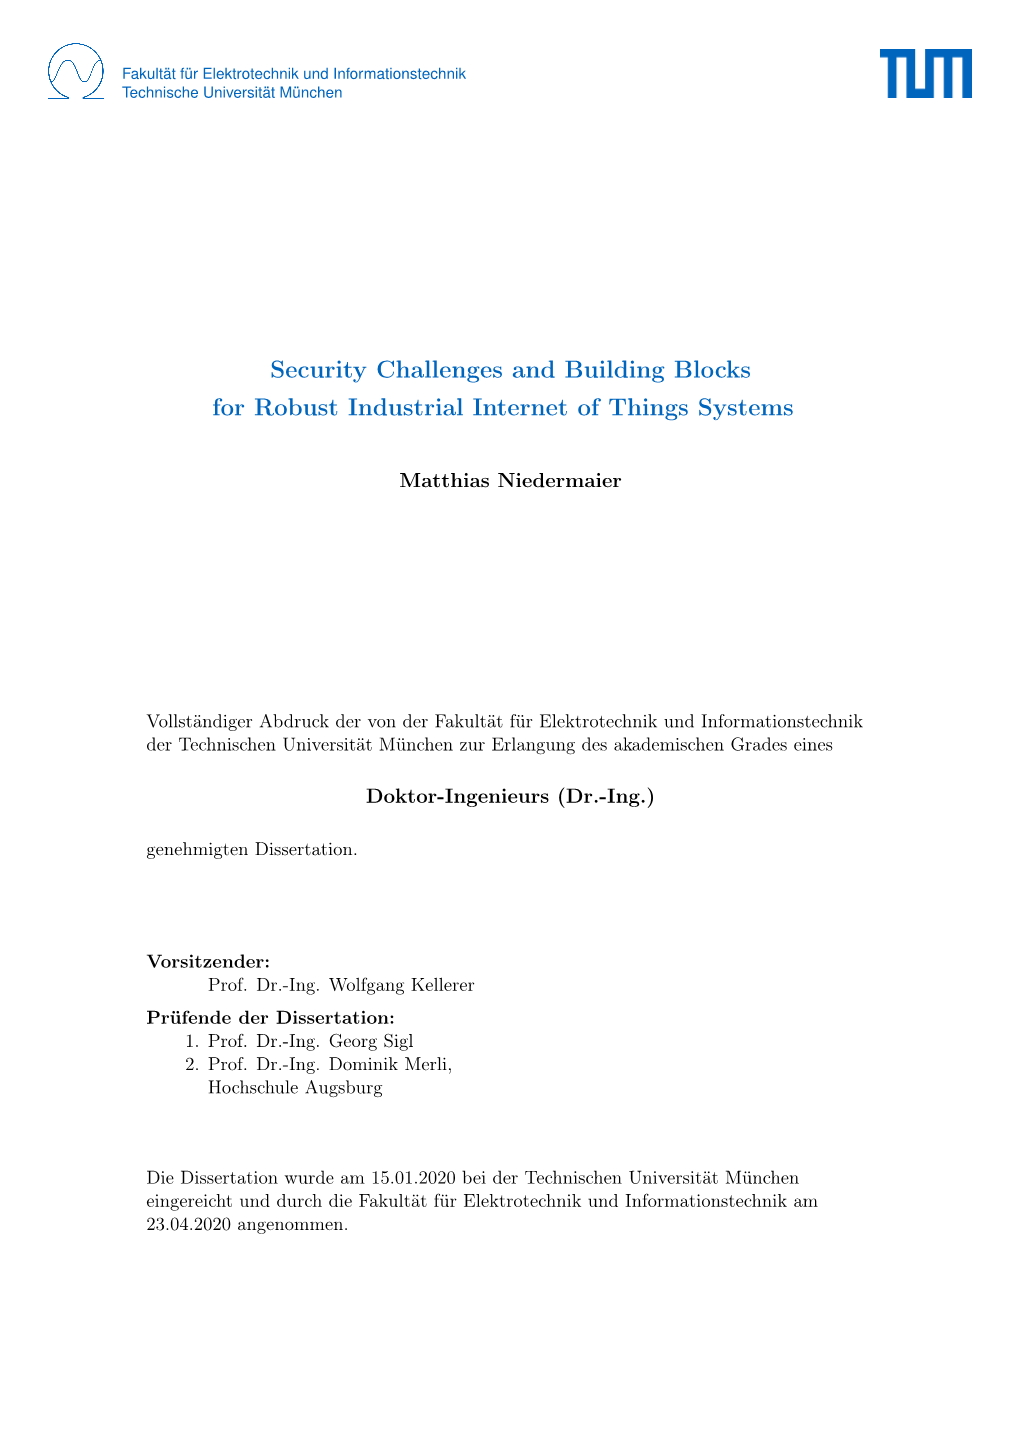 Security Challenges and Building Blocks for Robust Industrial Internet of Things Systems